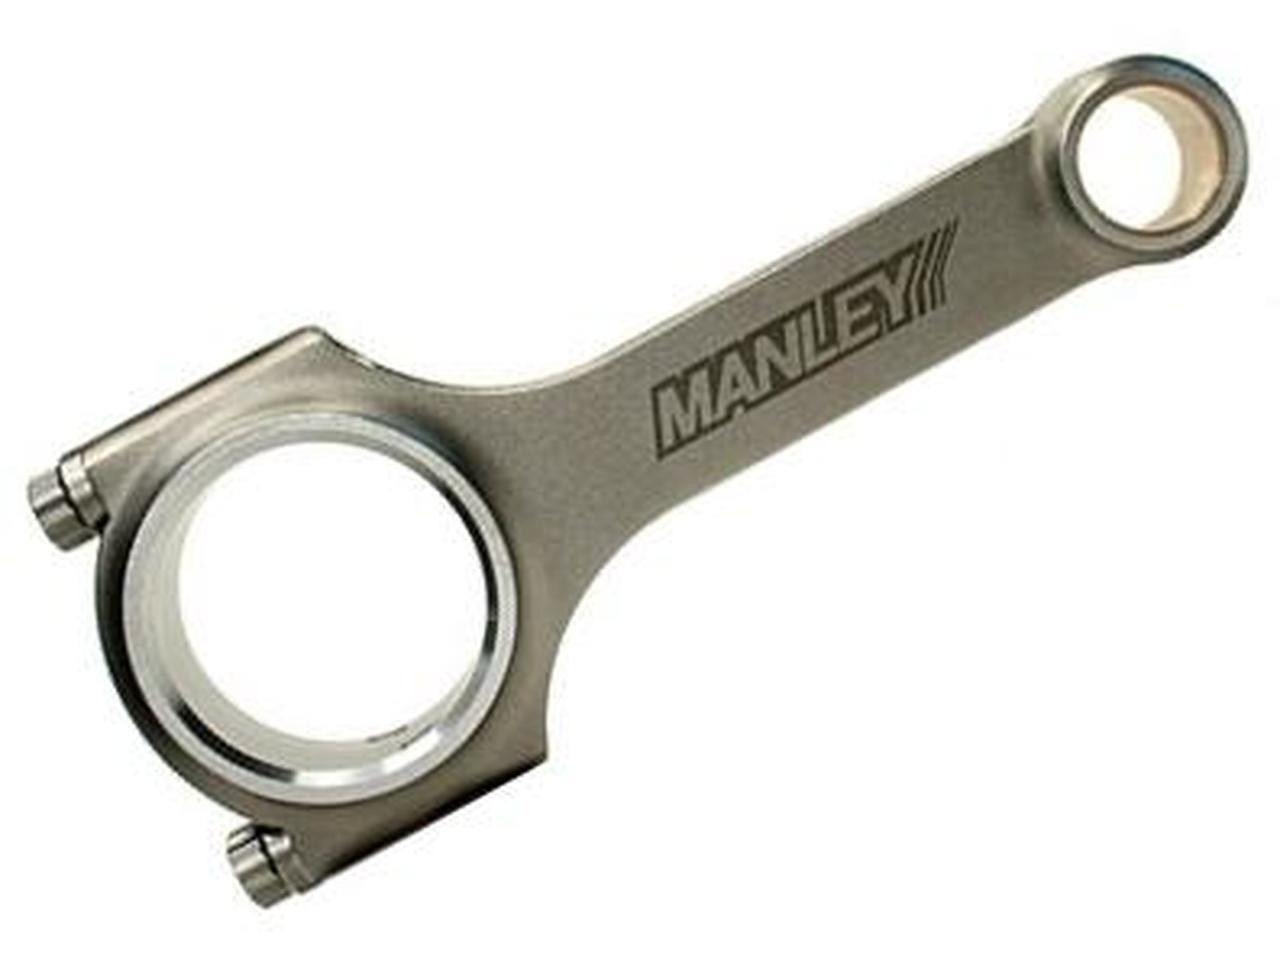 BMW Pro Series I-Beam Turbo Tuff Connecting Rods - Manley 14448-6